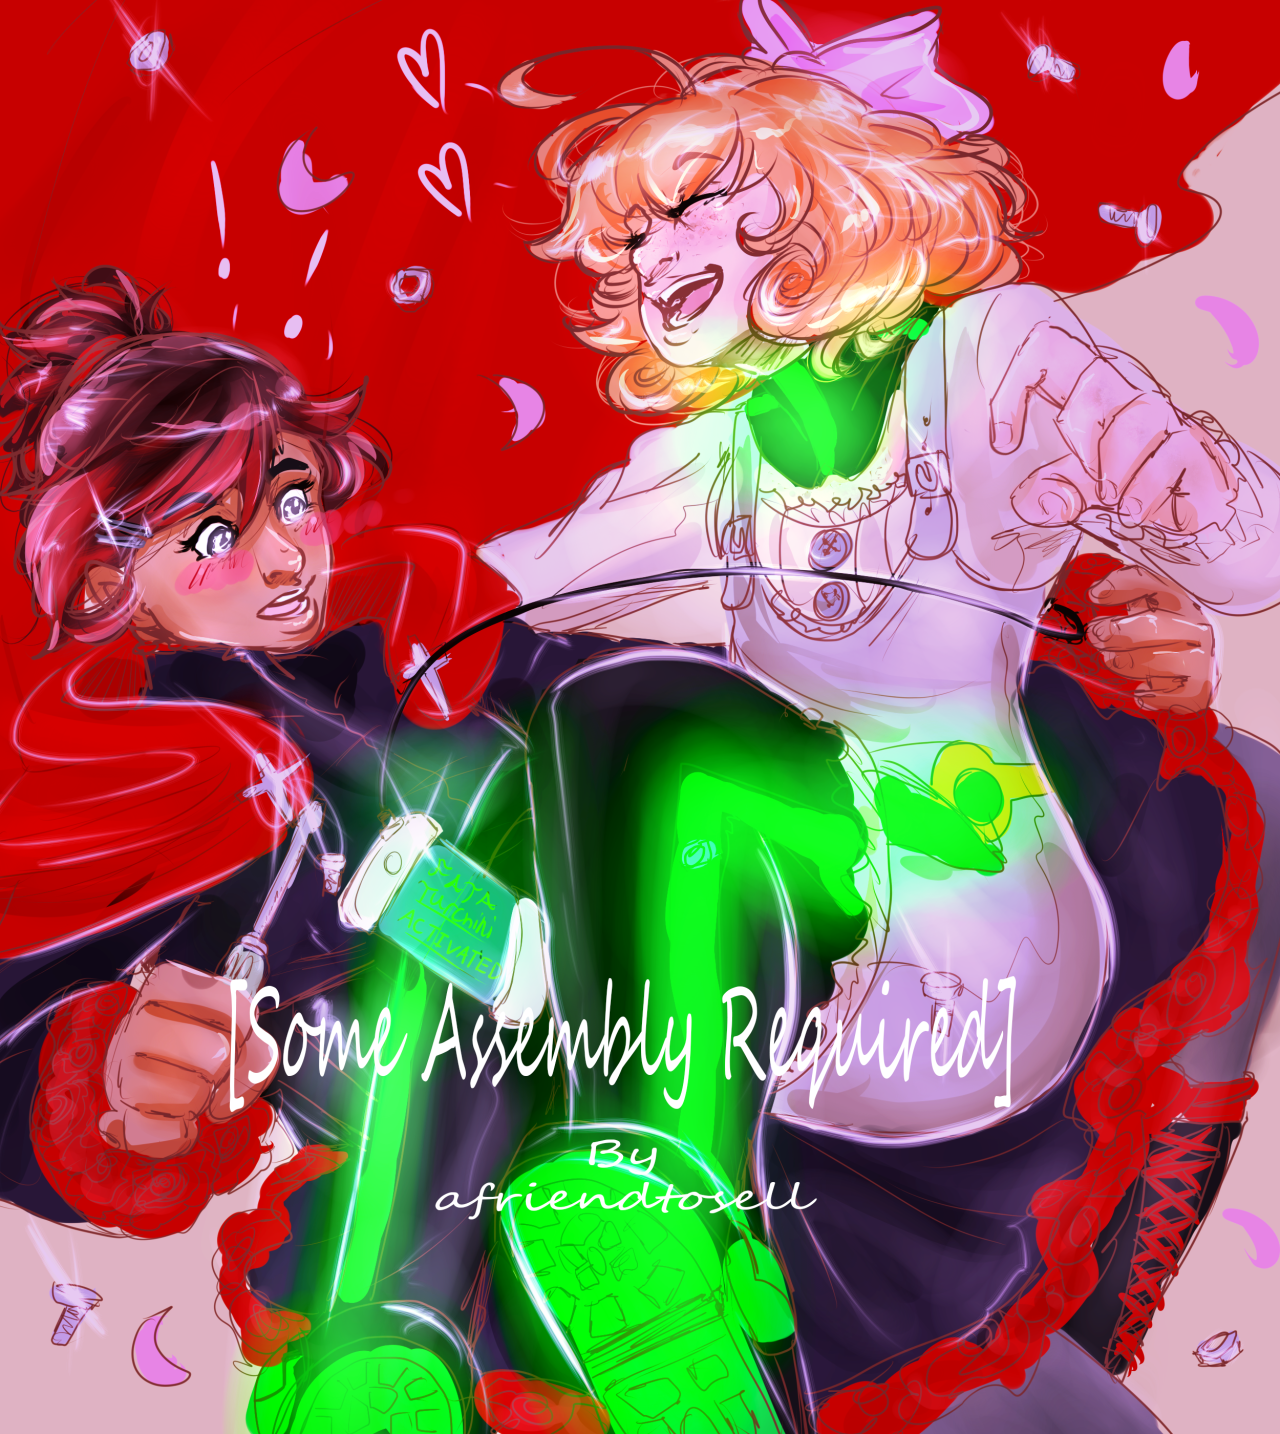 I did a sorta cover thing for afriendtosell’s awesome Nuts n’ Dolts fanfic 